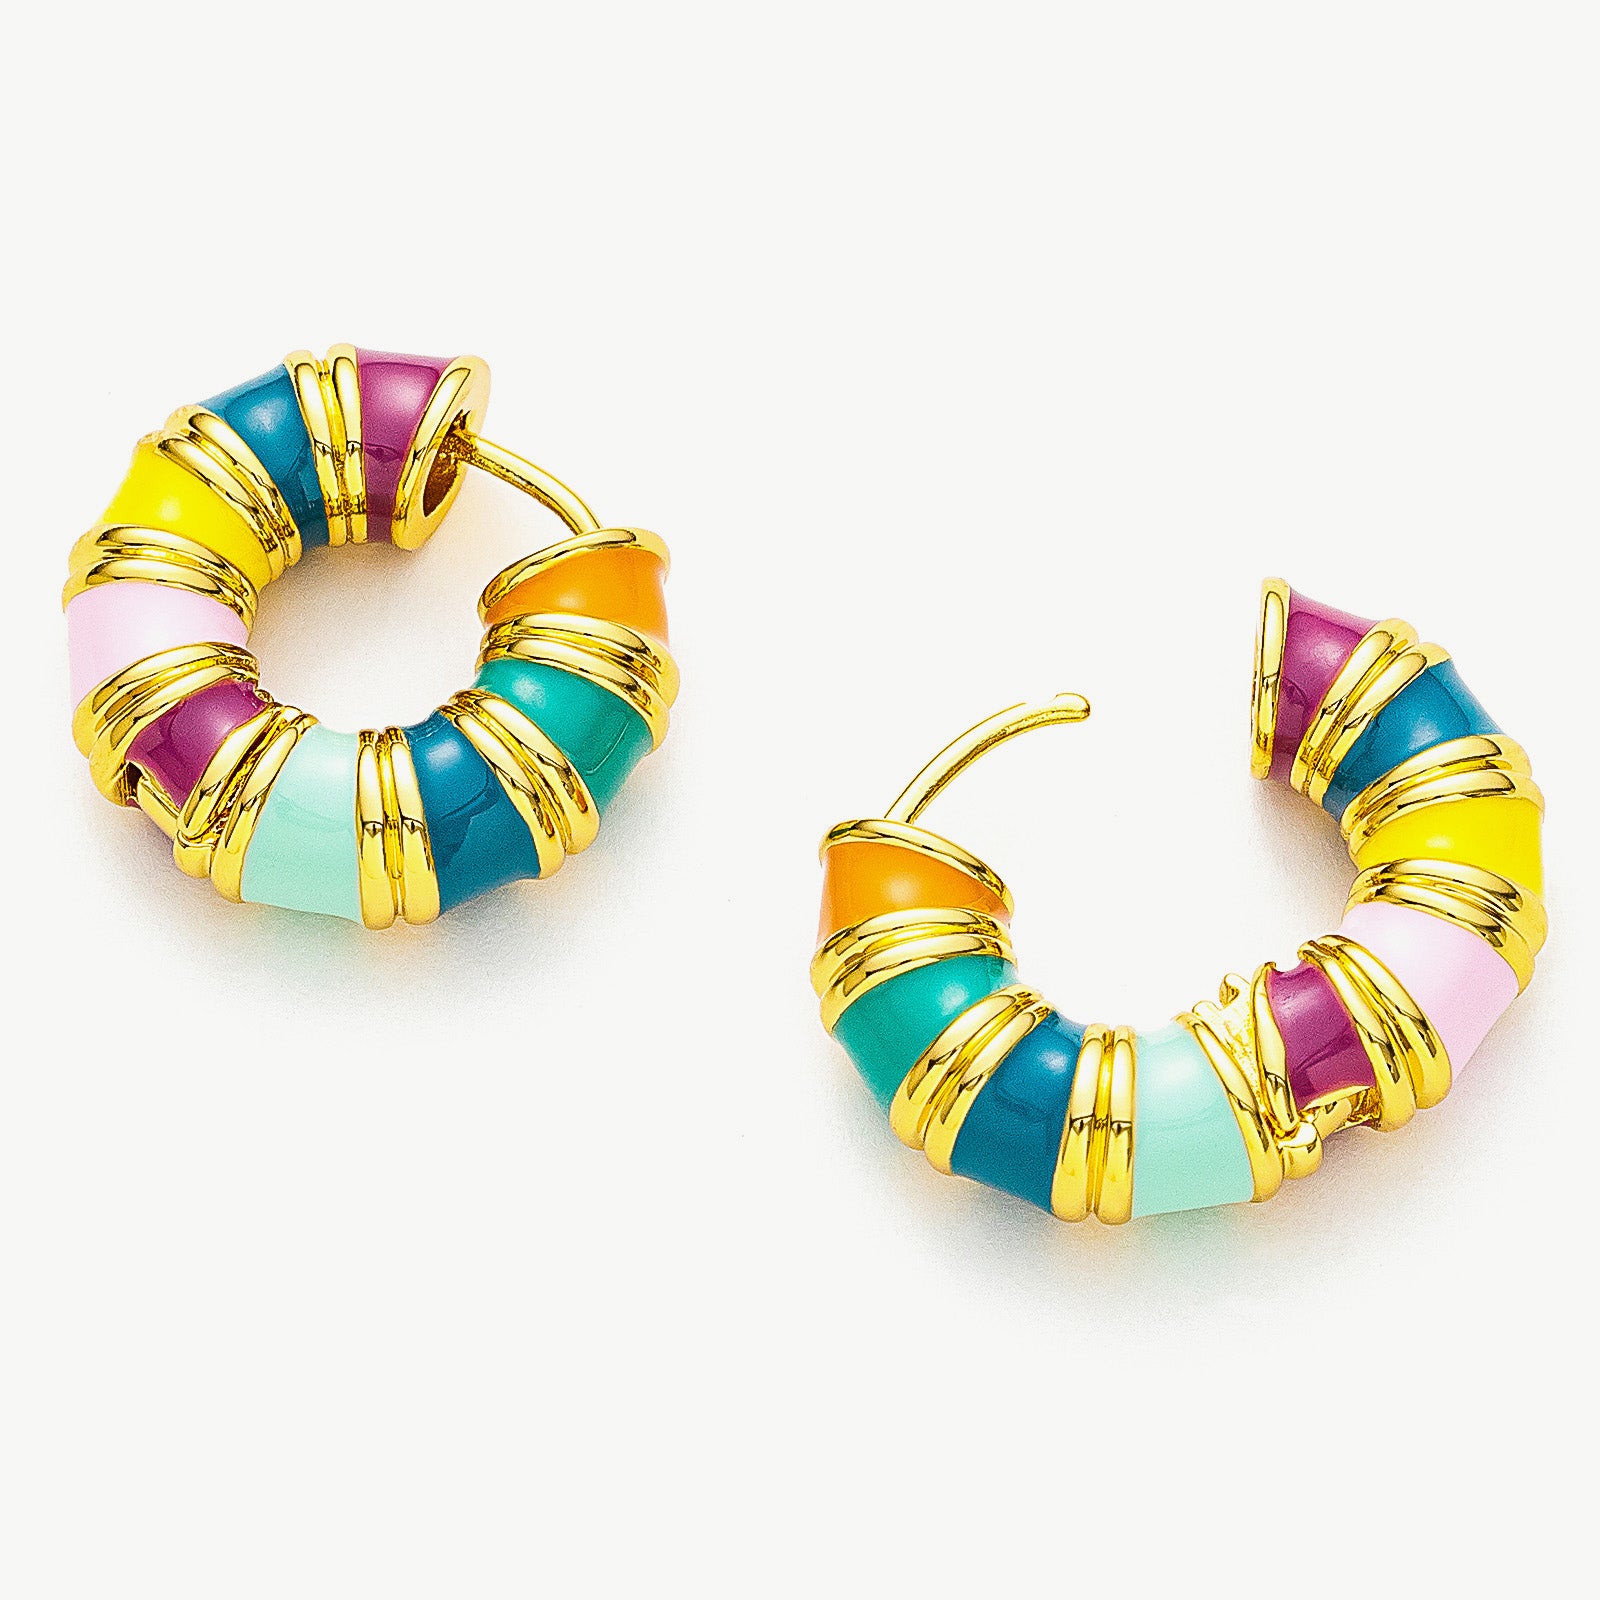 Multicolor Hoop Earrings, a festive and fun addition to your jewelry collection, perfect for adding a splash of color to any occasion.